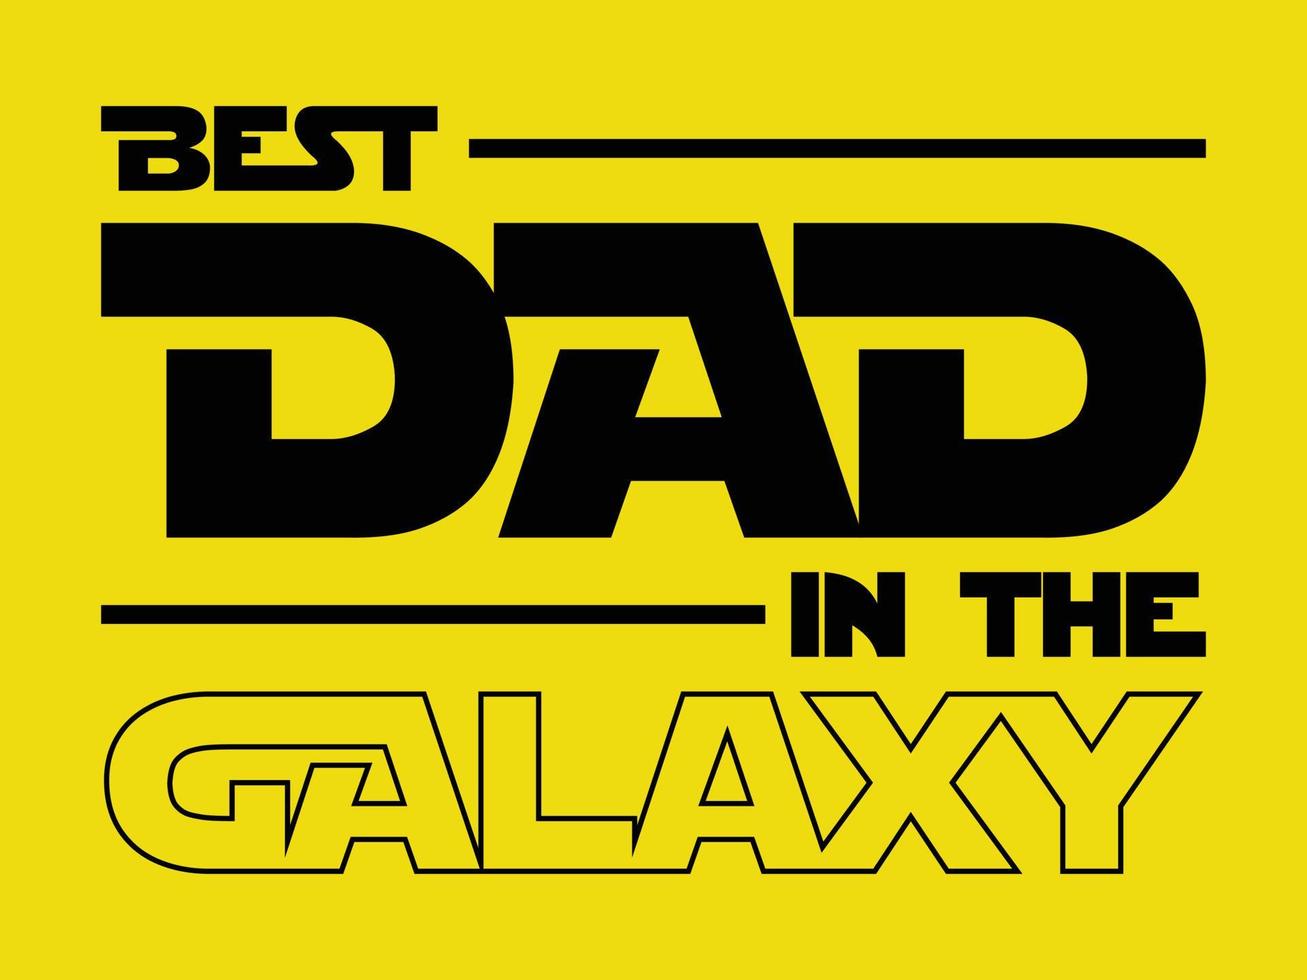 Best dad in the galaxy. Fathers day design vector